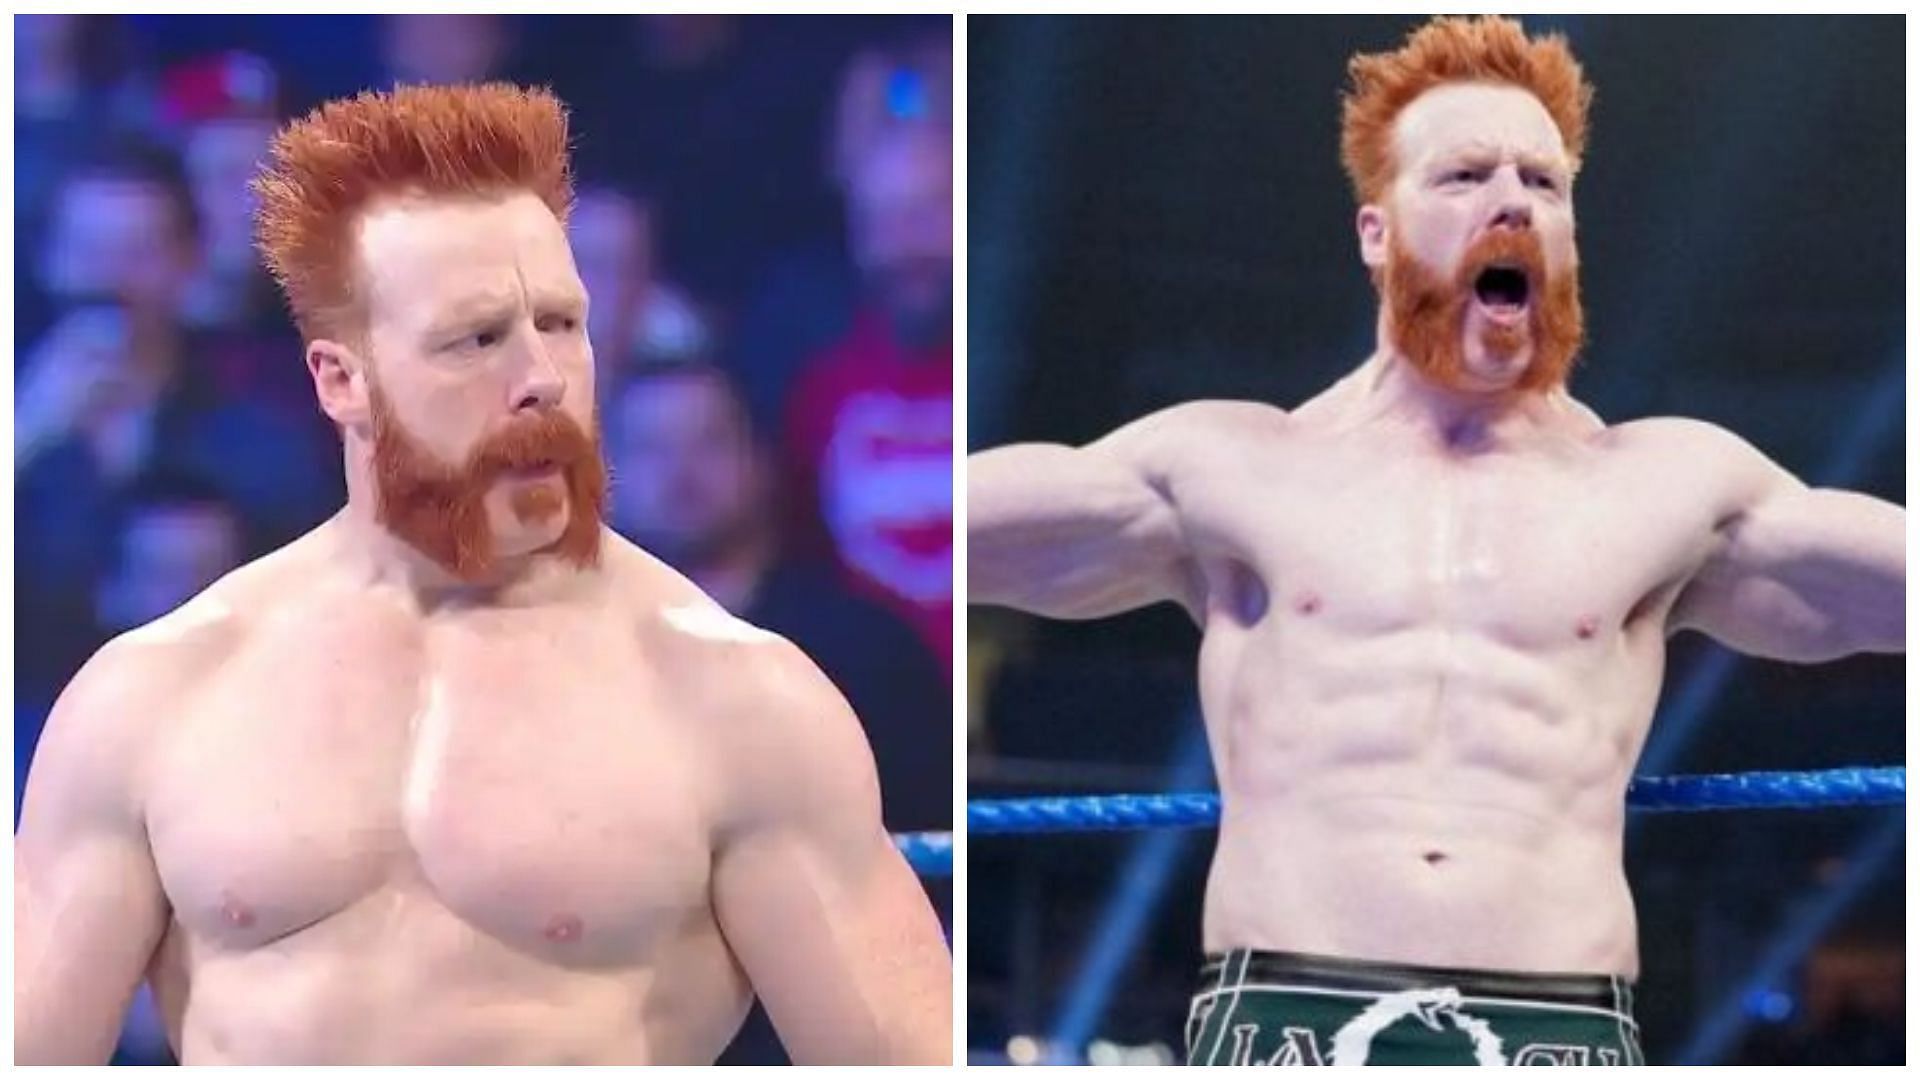 Sheamus is a former WWE Champion.